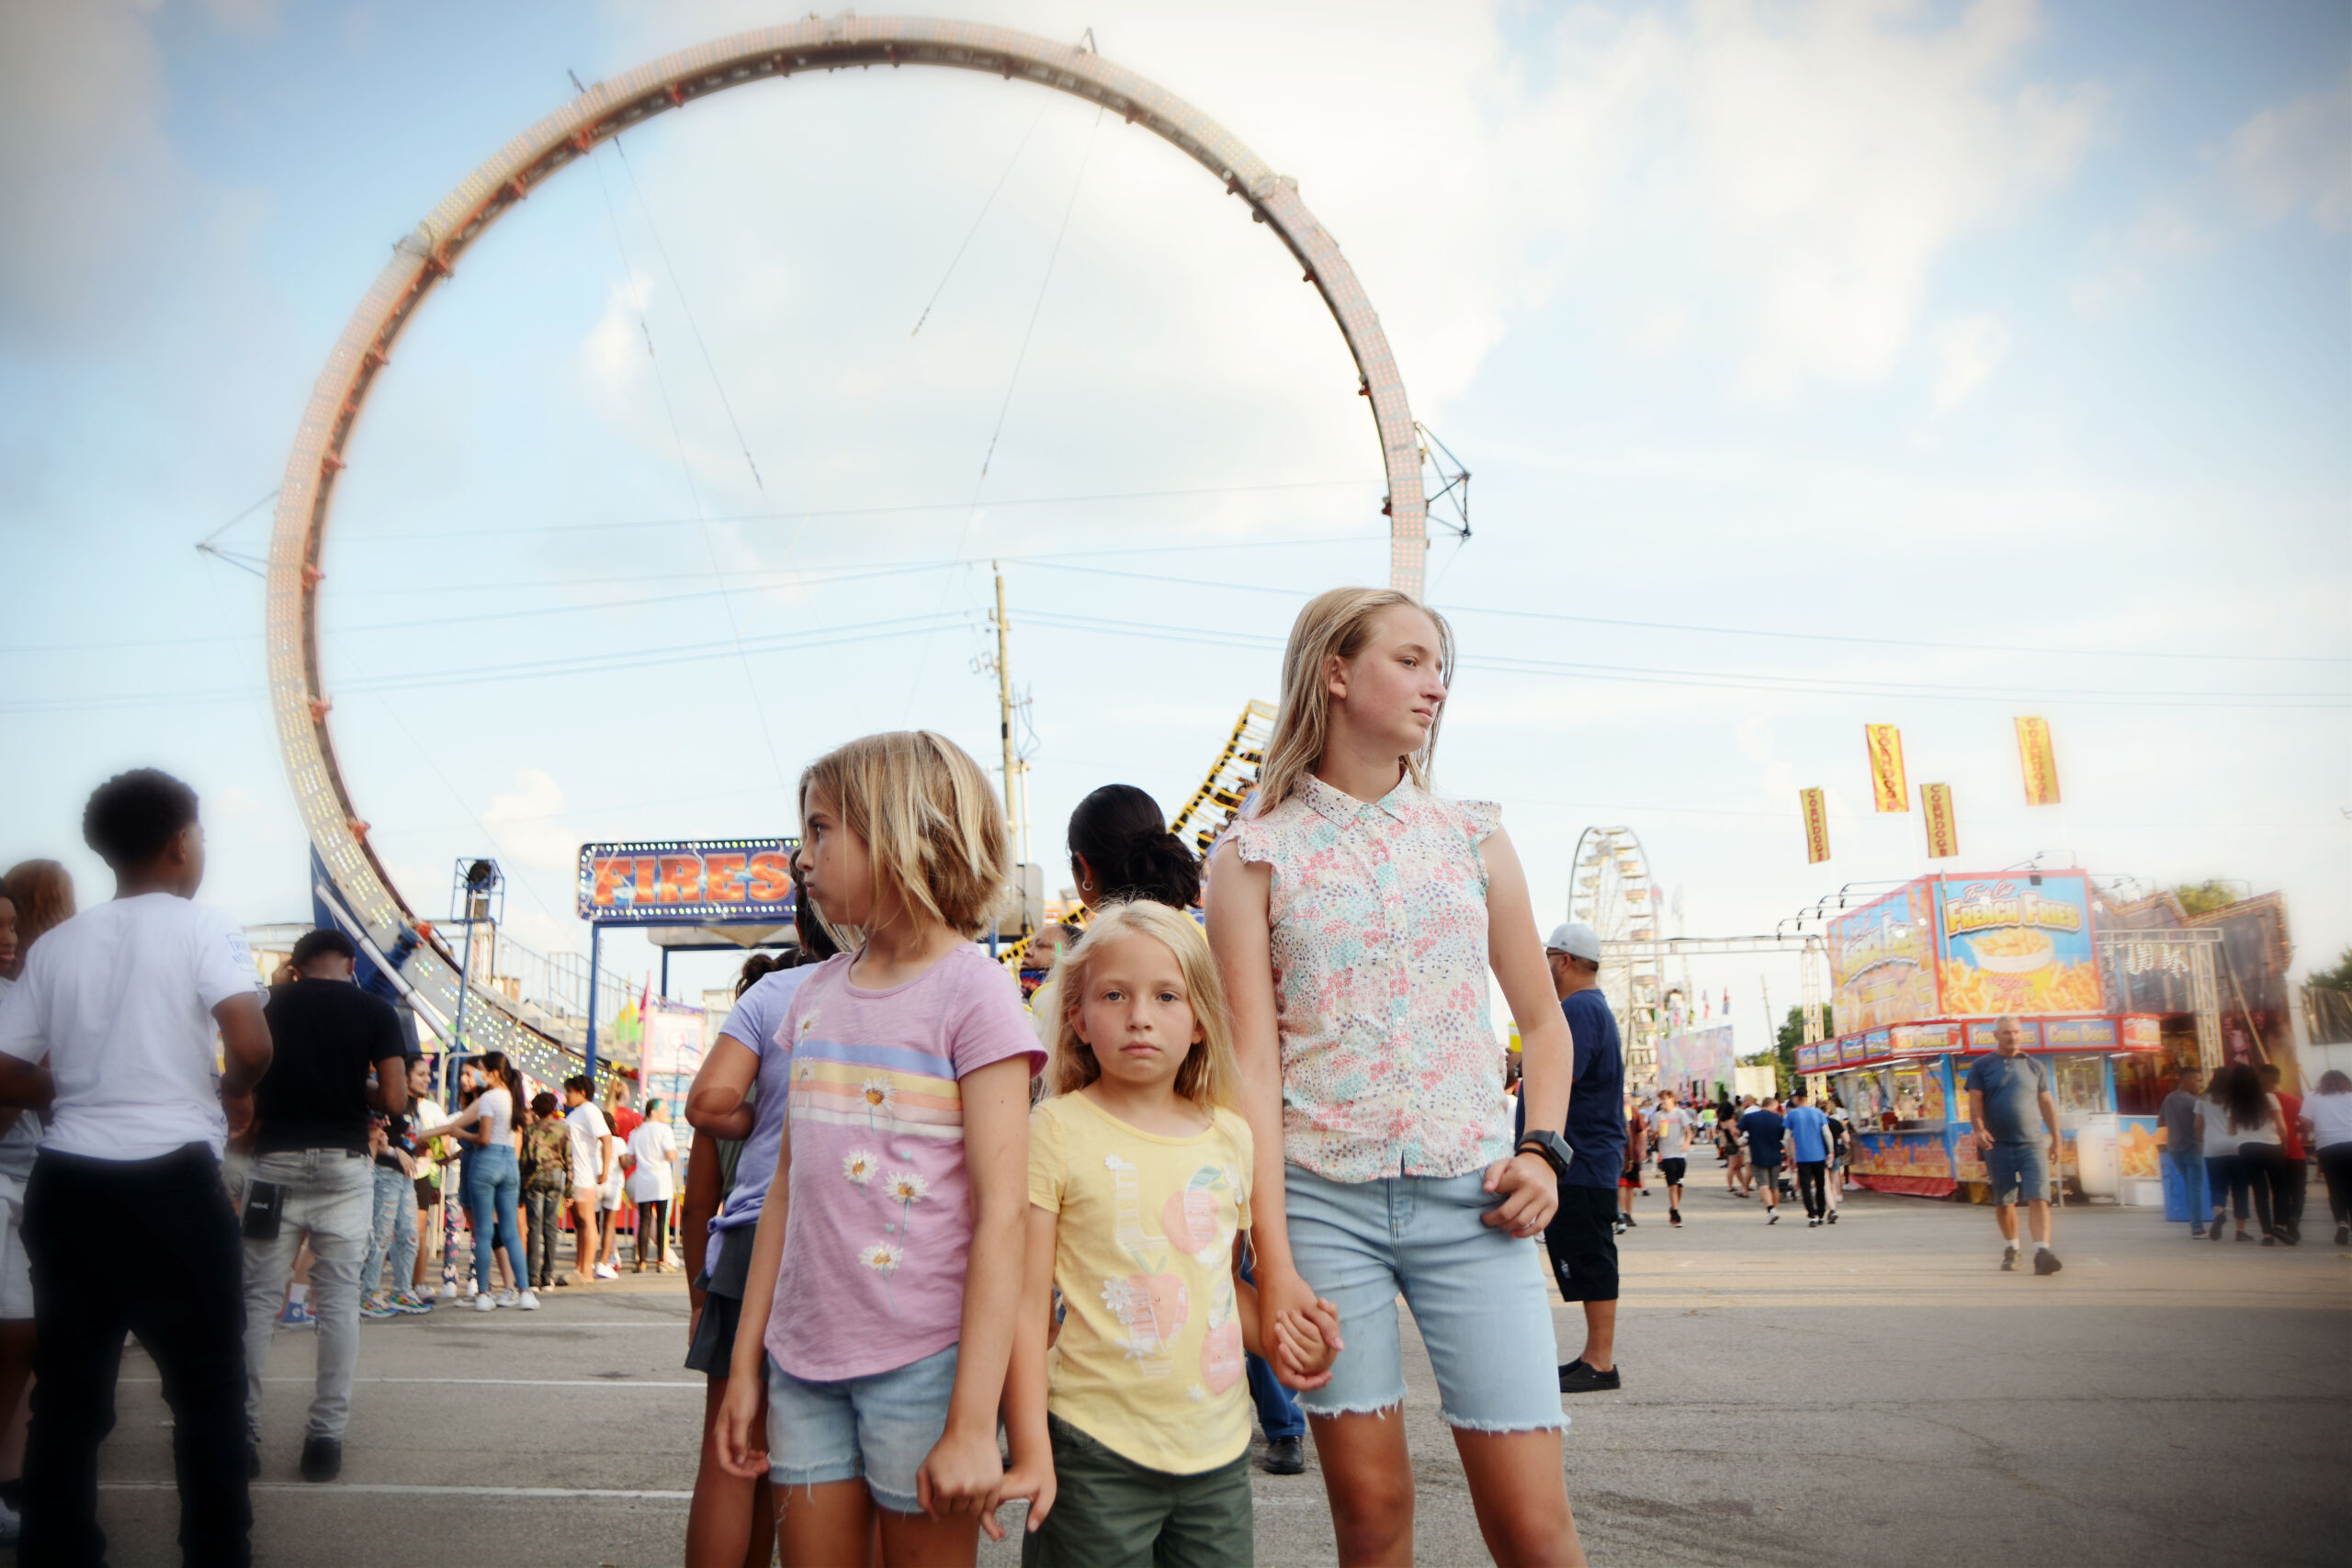 Three girls in front of ride at state fair